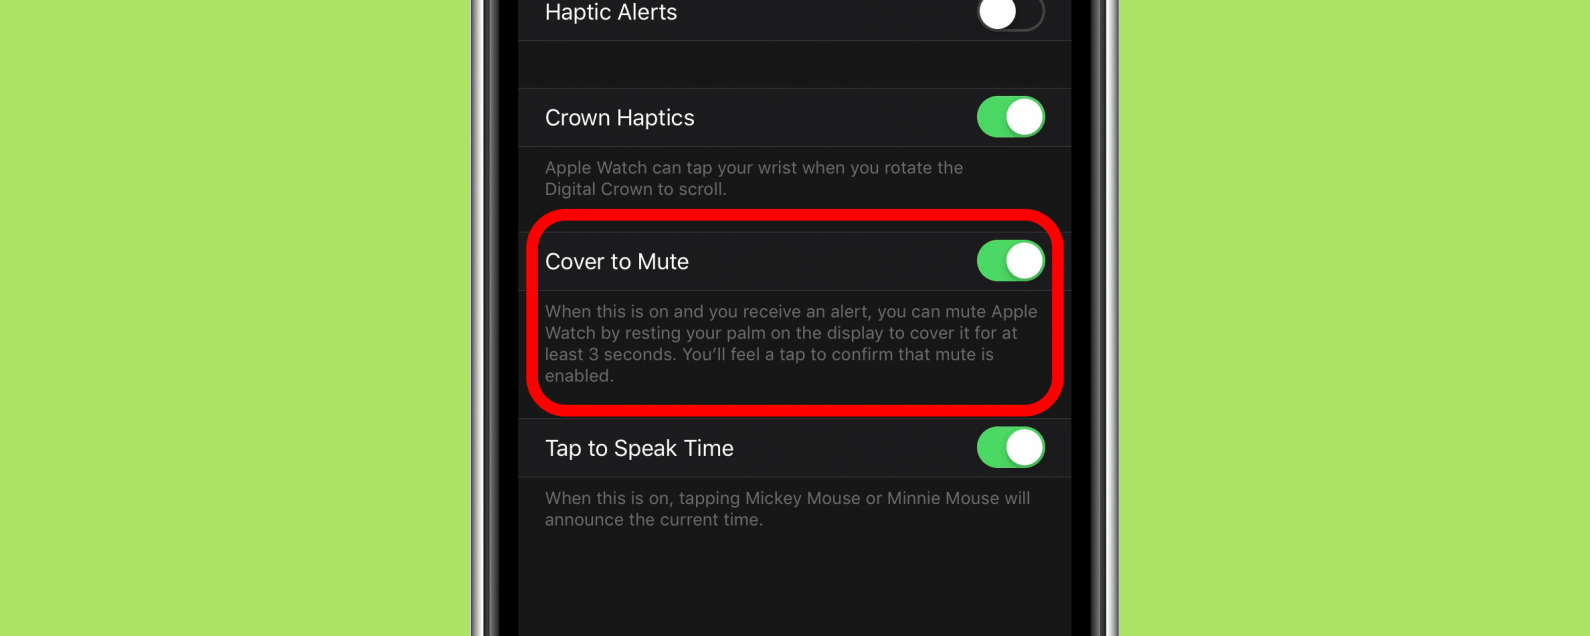 How to Enable Cover to Mute on the Apple Watch